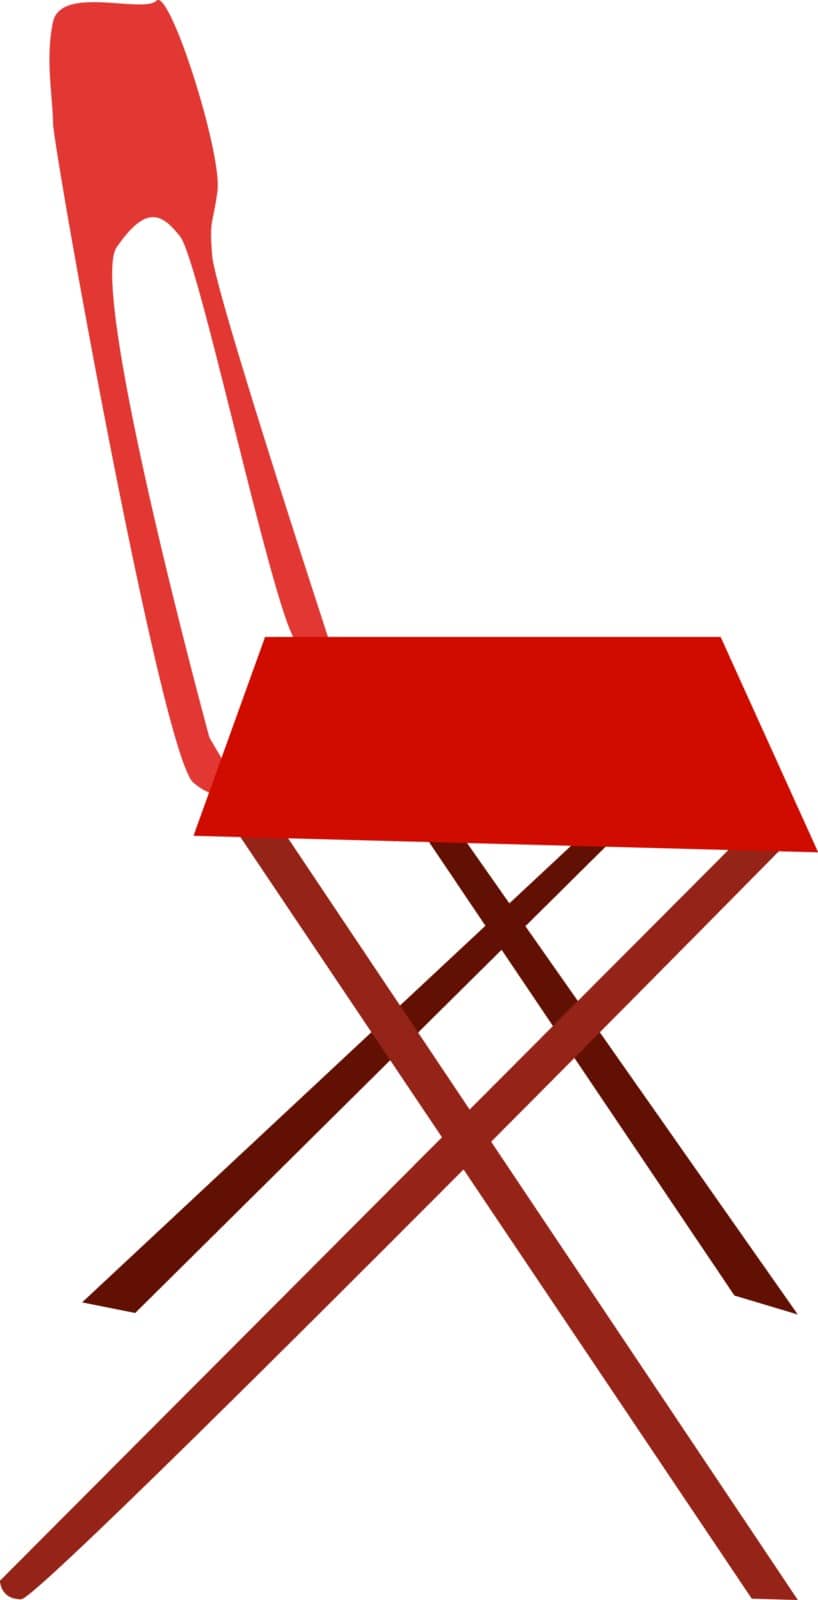 Red chair, illustration, vector on white background.